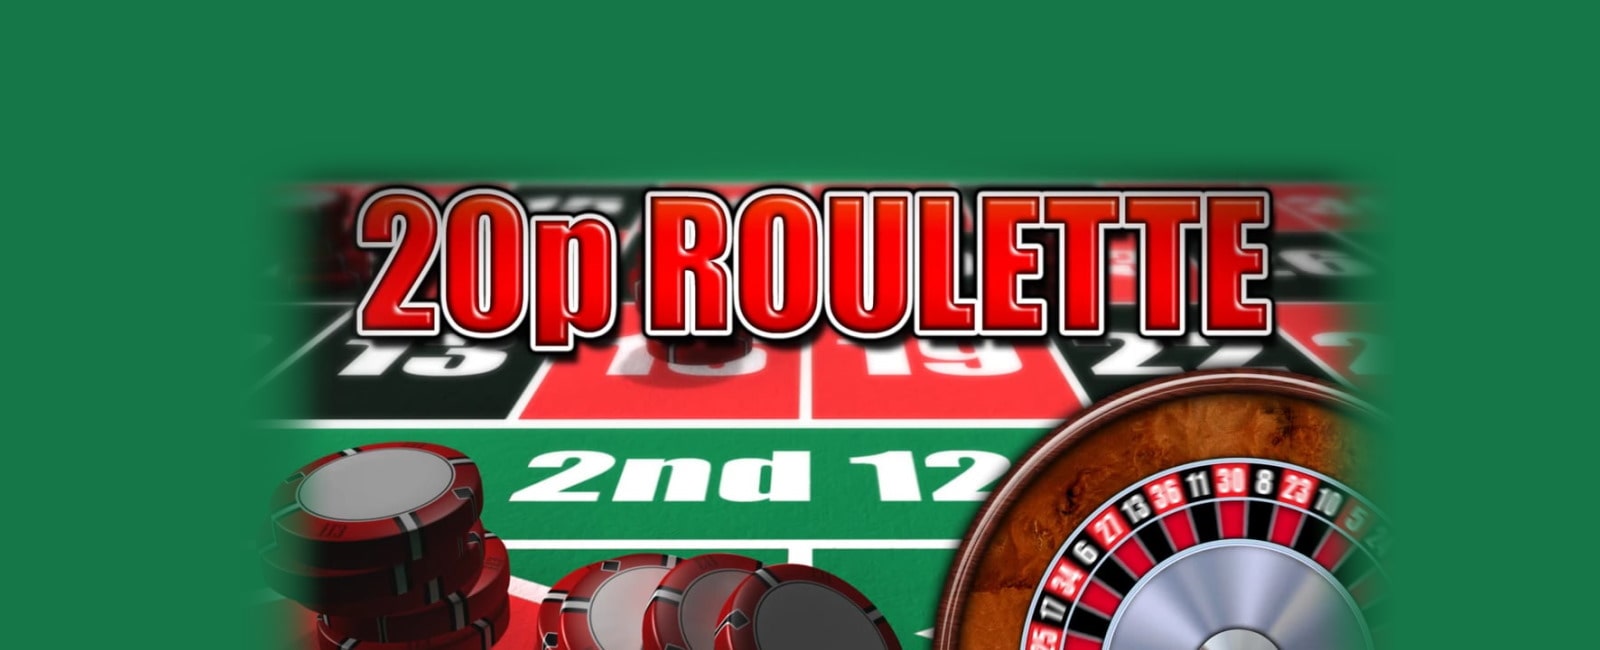 William hill penny roulette online